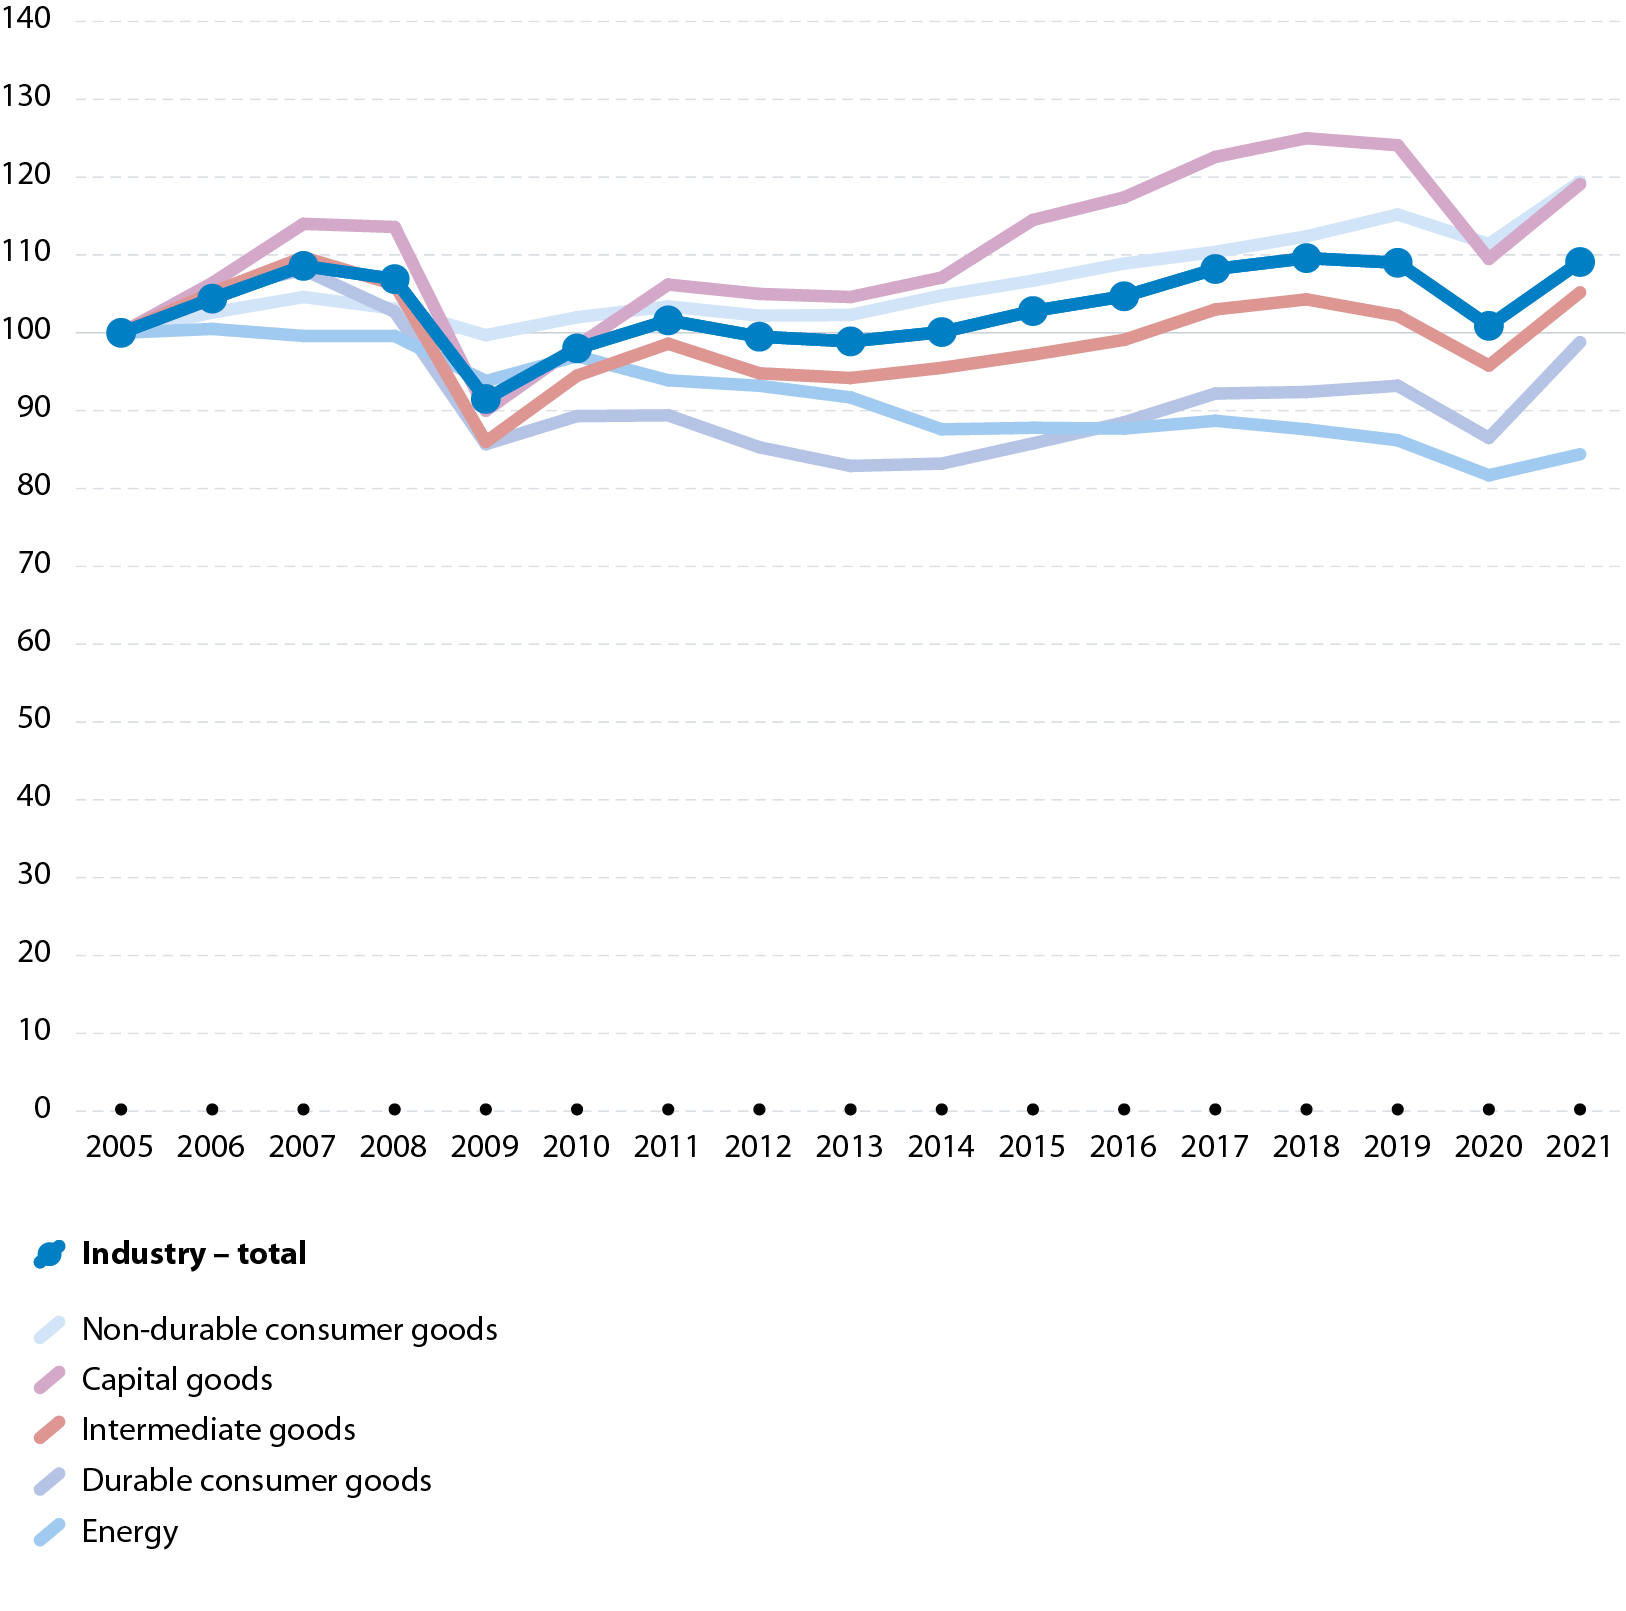 Production index. Data for the EU. Annual data for 2005 to 2021. Industrial total and main industrial groupings. Line graph. In 2021, the industrial production index was 9% higher than it had been in 2005.